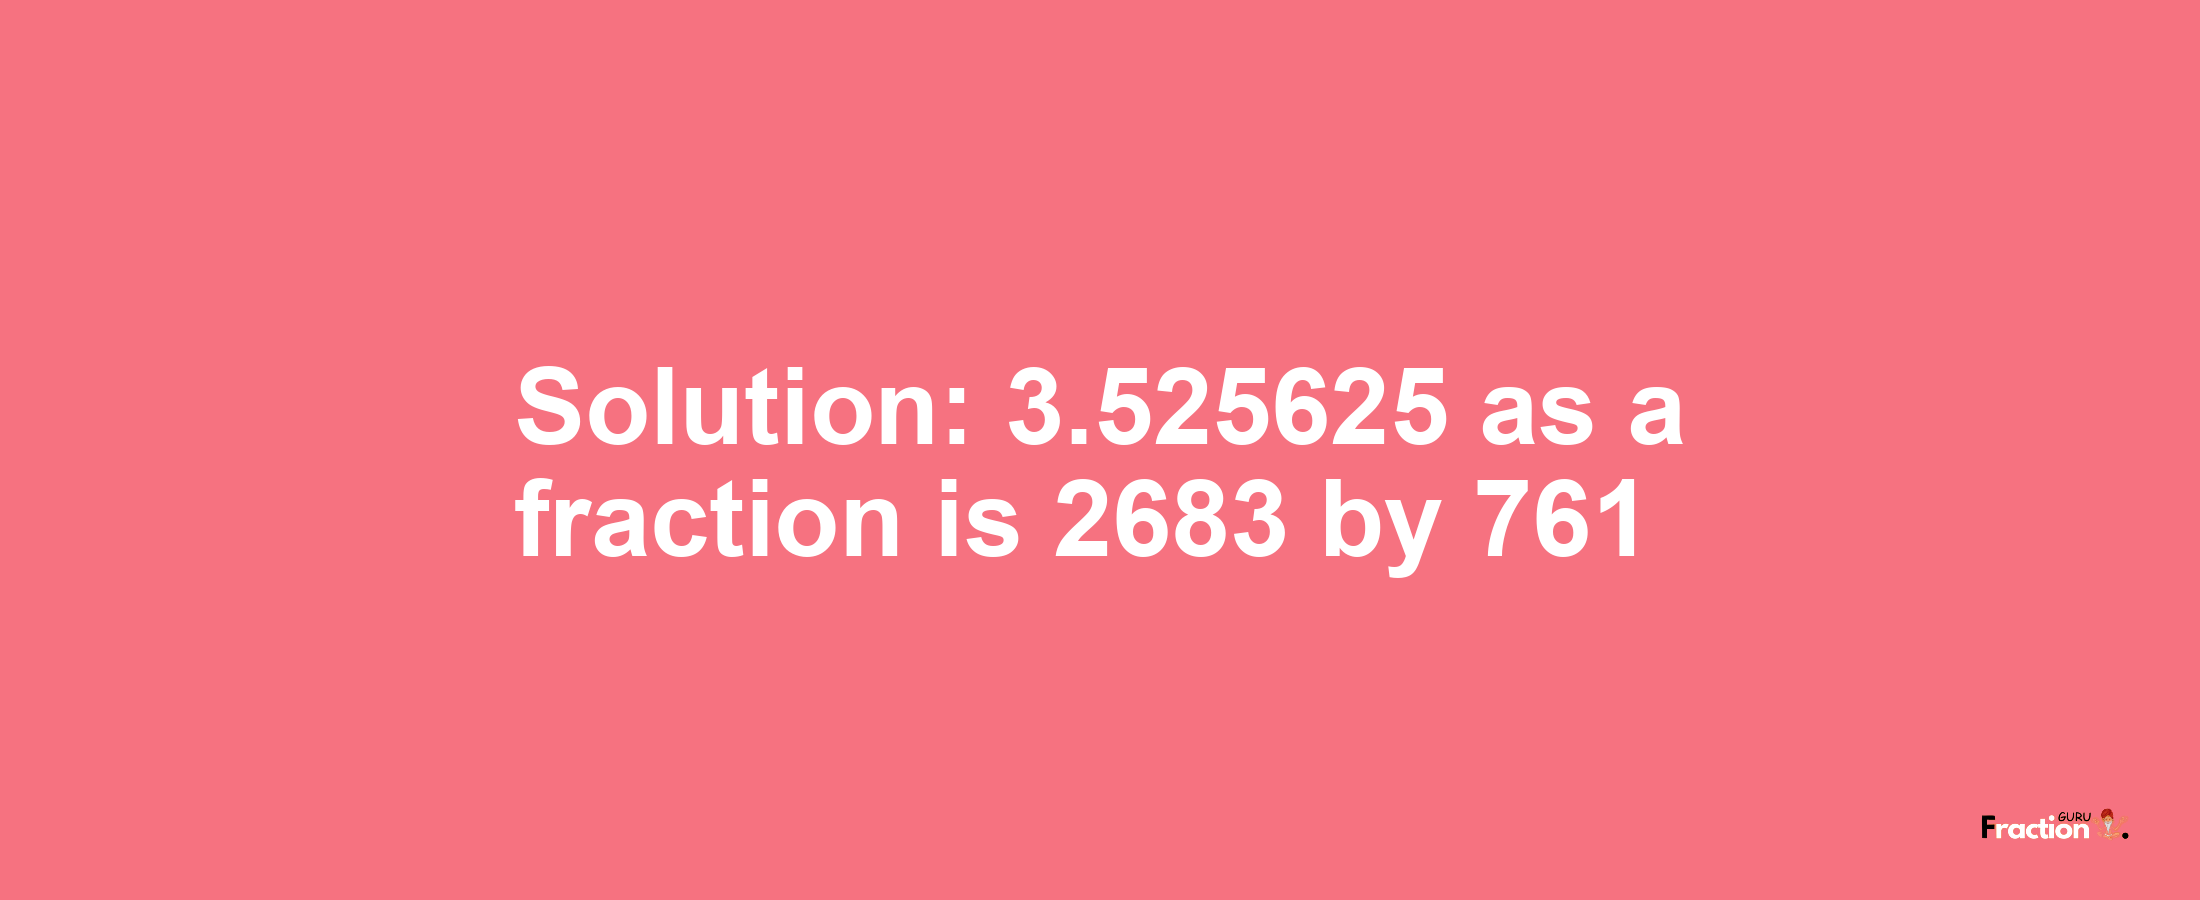 Solution:3.525625 as a fraction is 2683/761